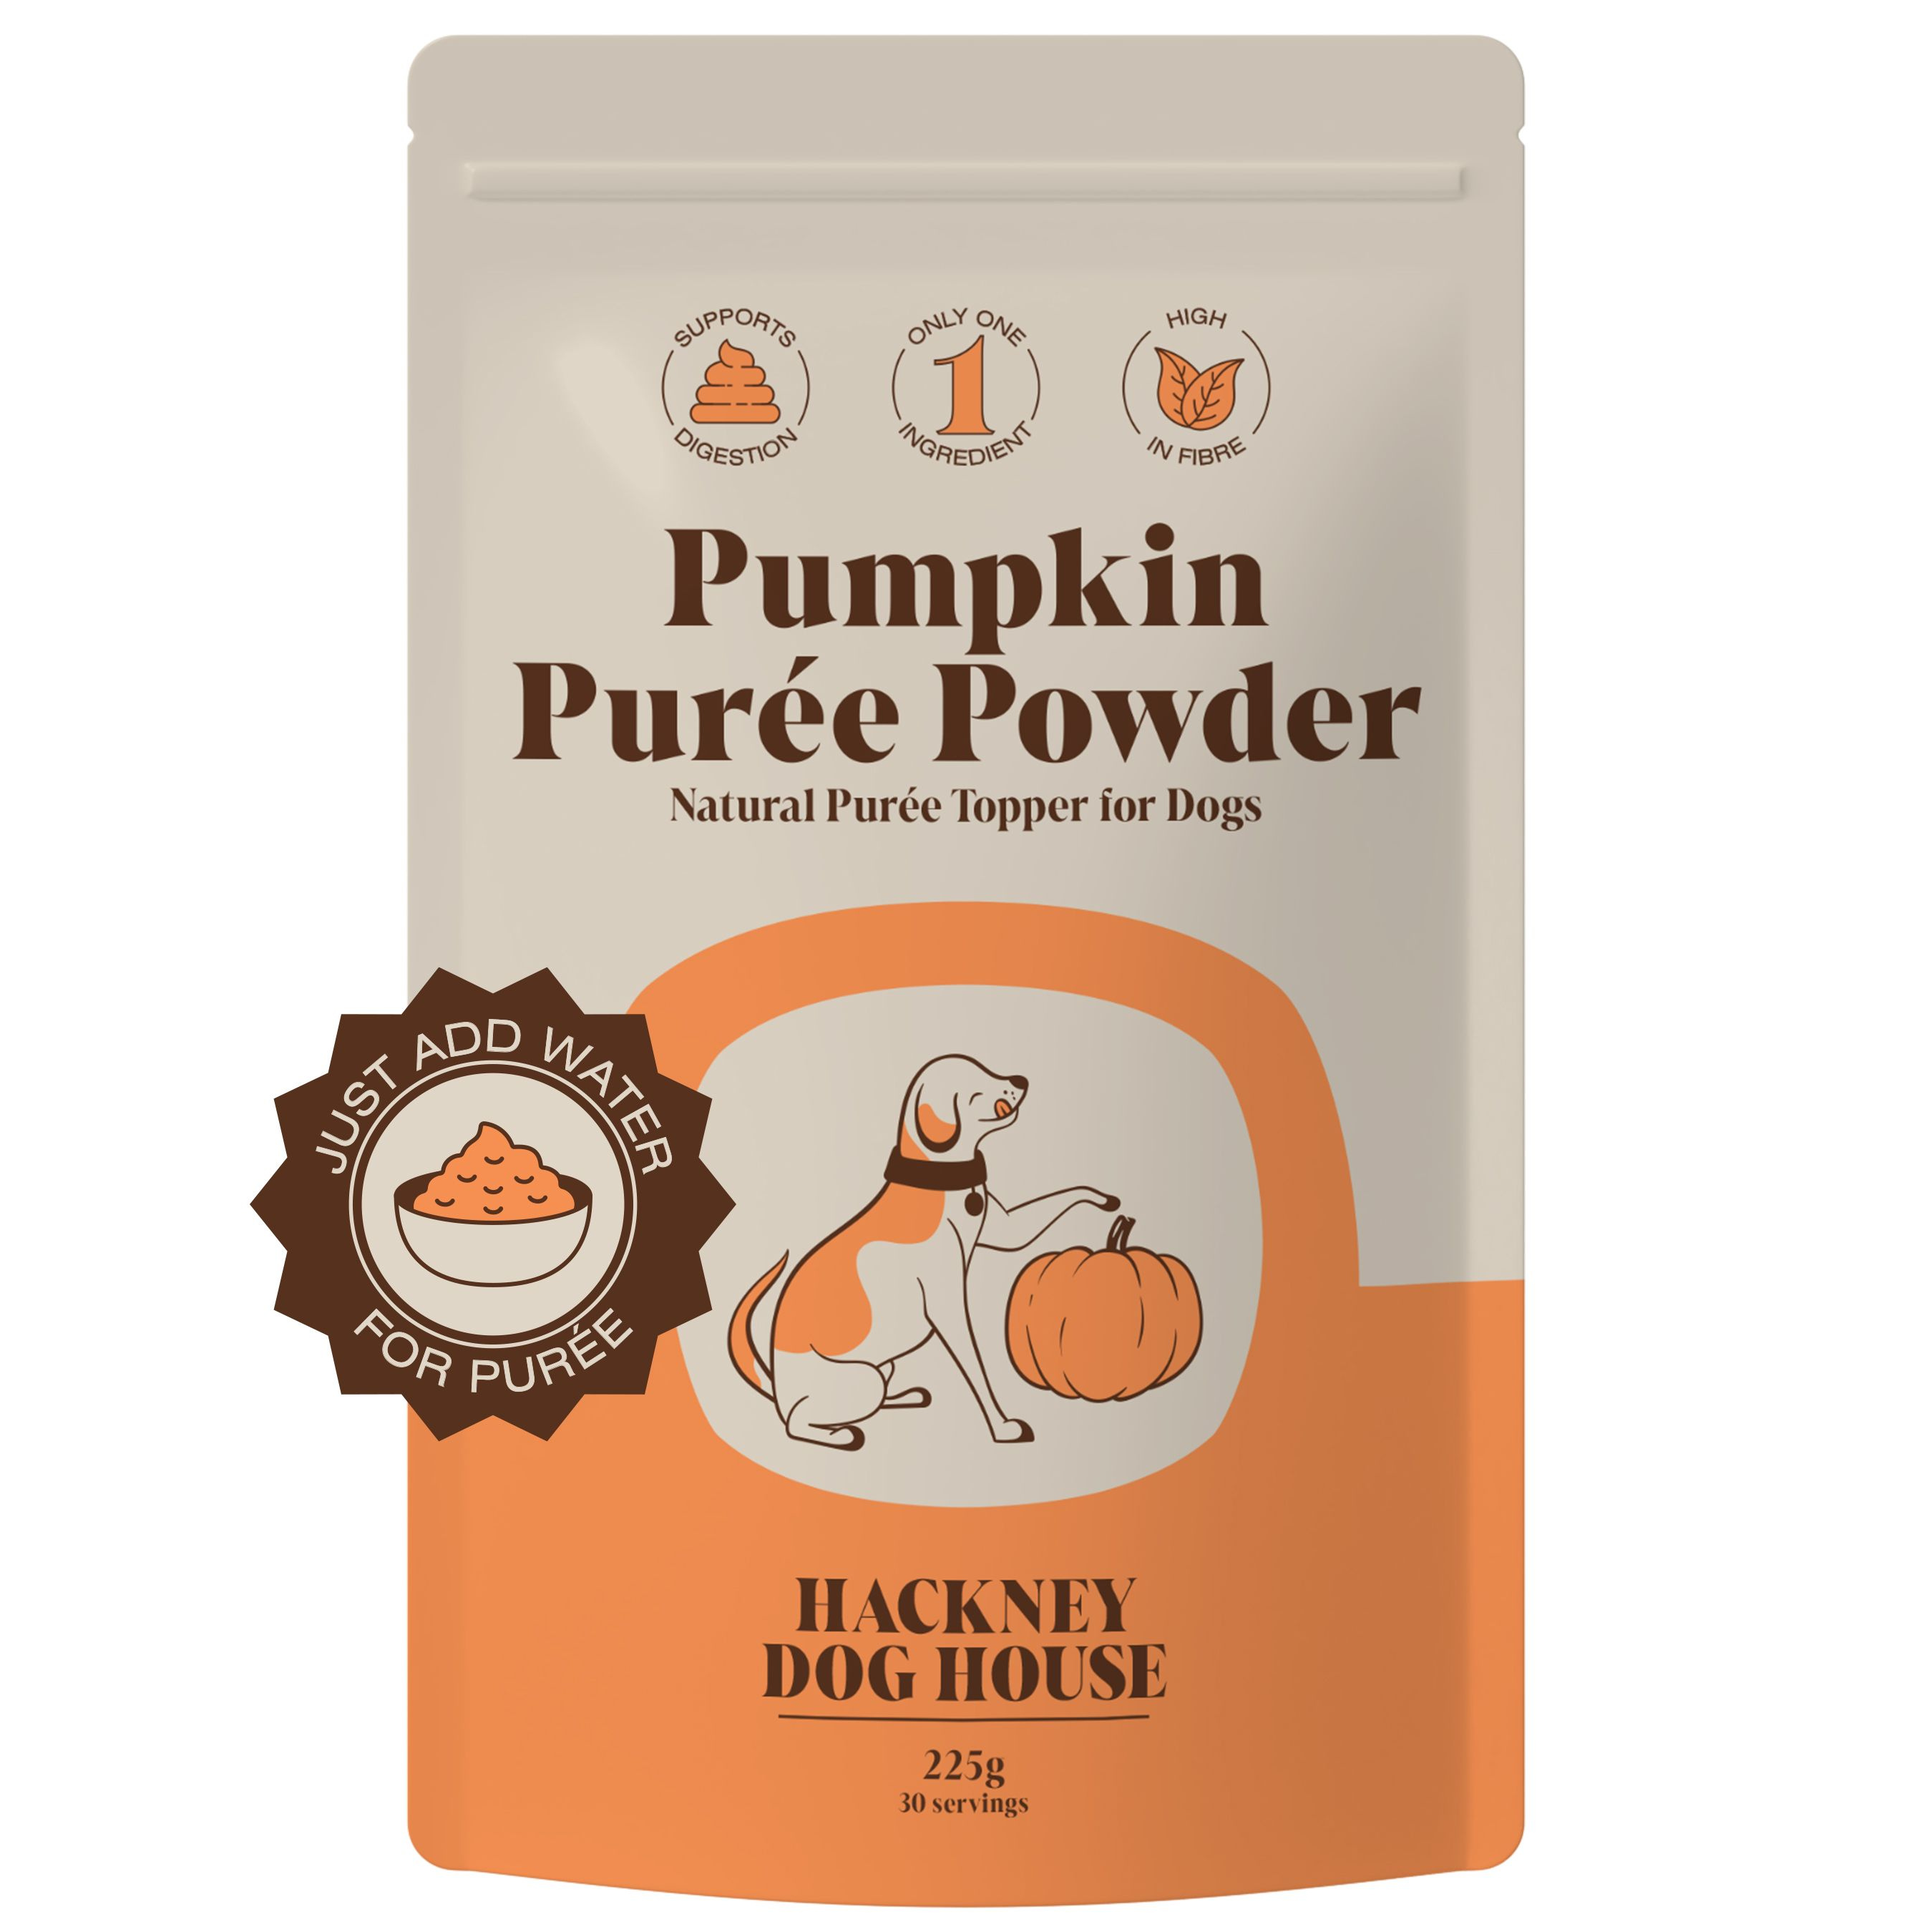 Packaging for pumpkin puree powder dog food topper by Hackney Dog House.